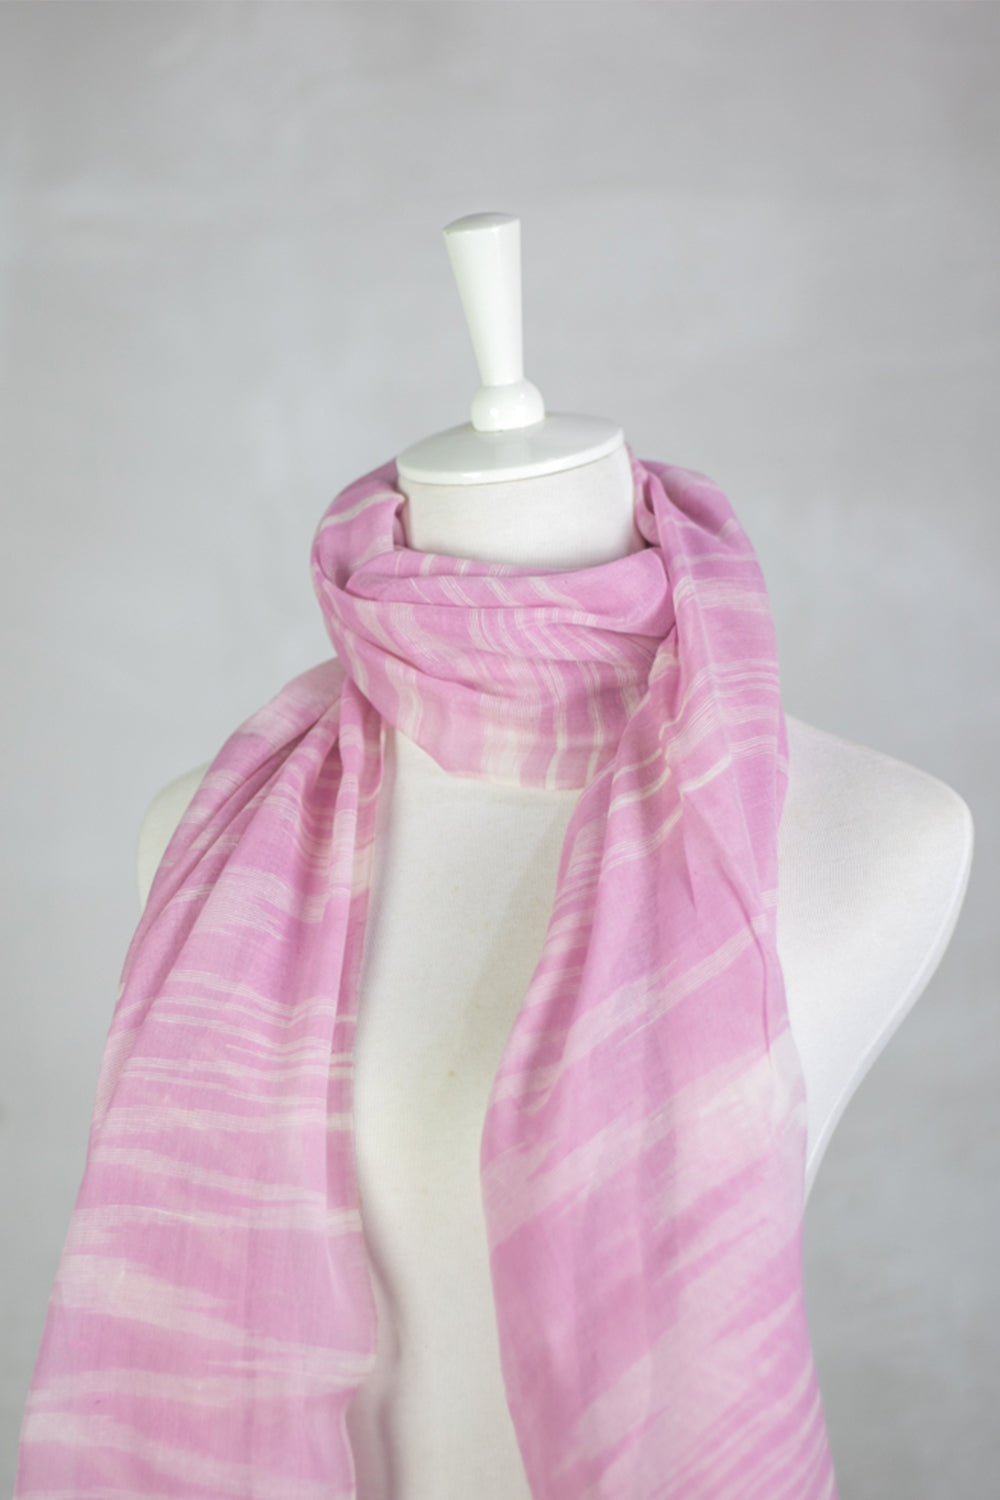 Artisan & Fox - Shawls - IKAT Scarf in Chateau Rose - Handcrafted in Cambodia